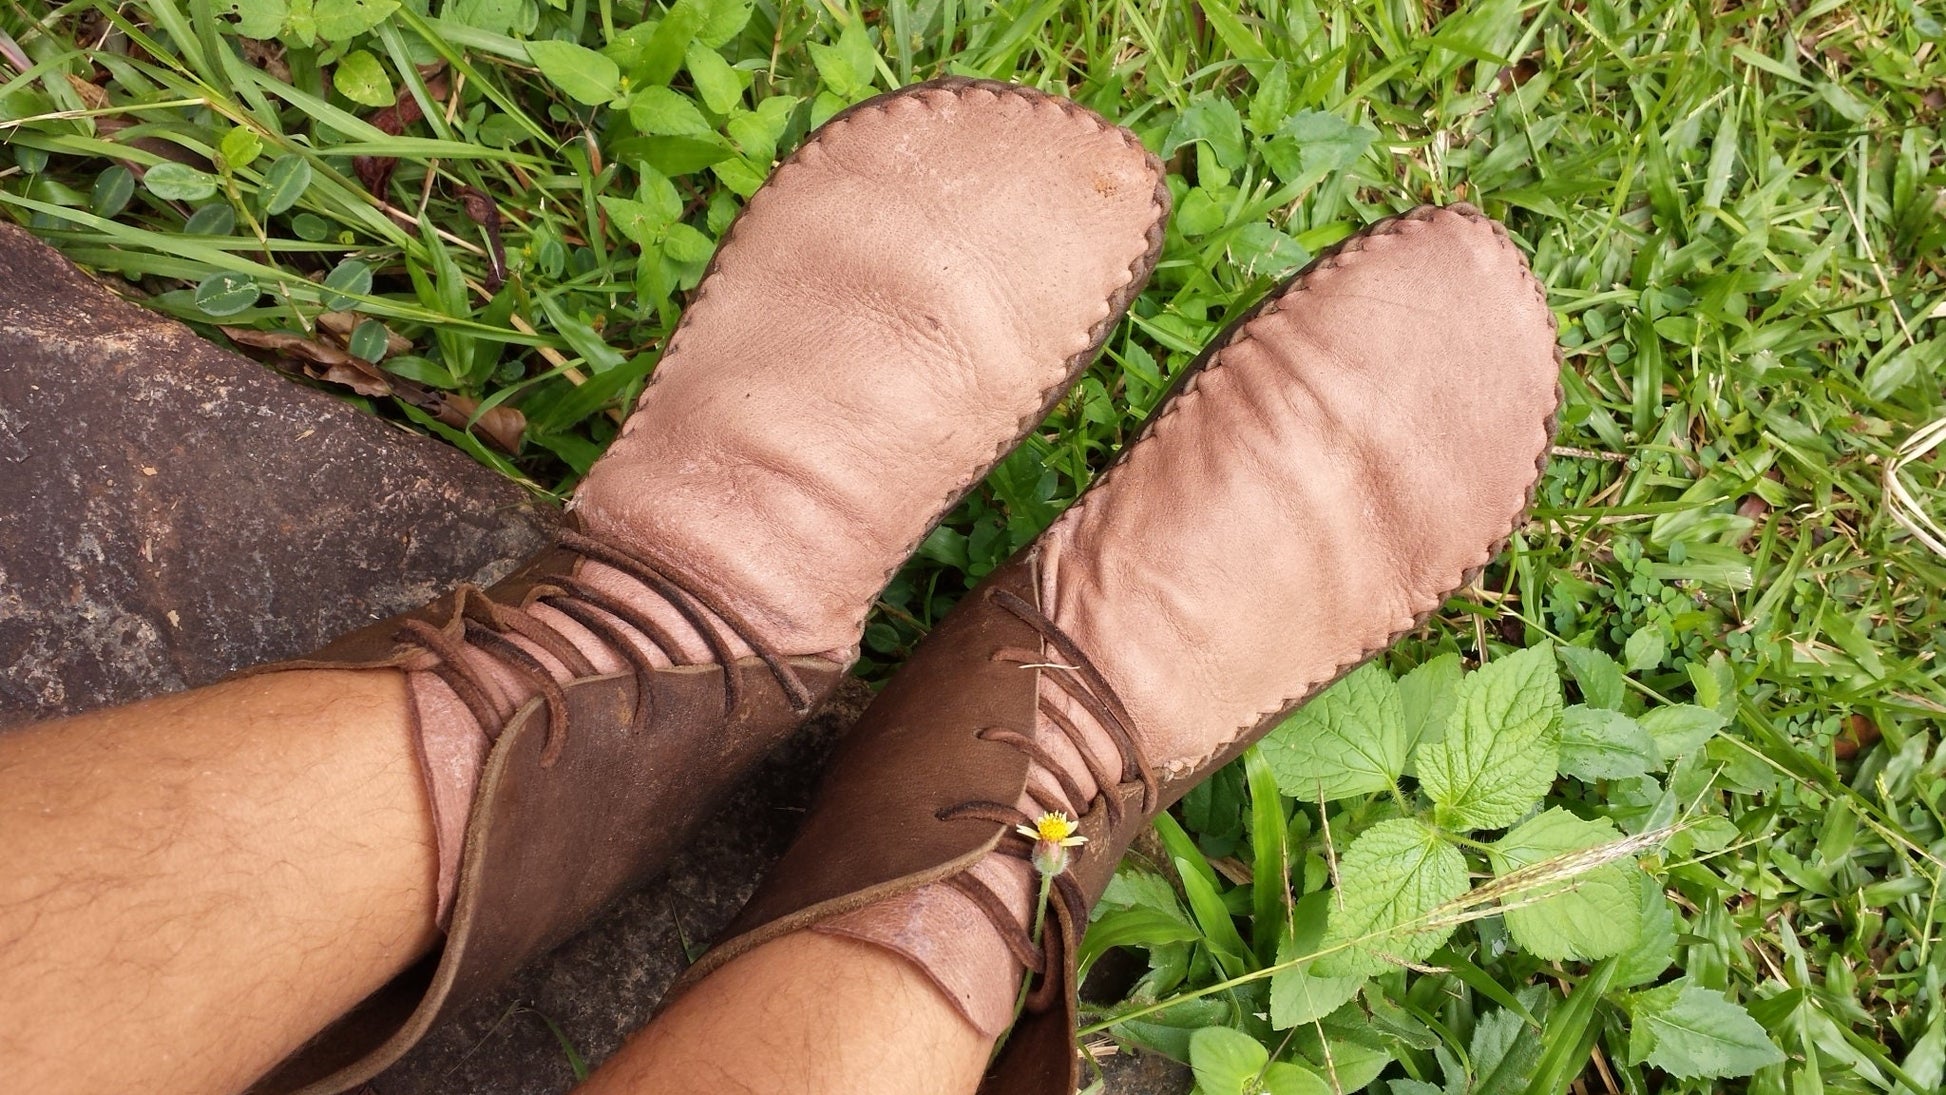 DIY Kit for "The Laced-Up Boots" Earthingmoccasins